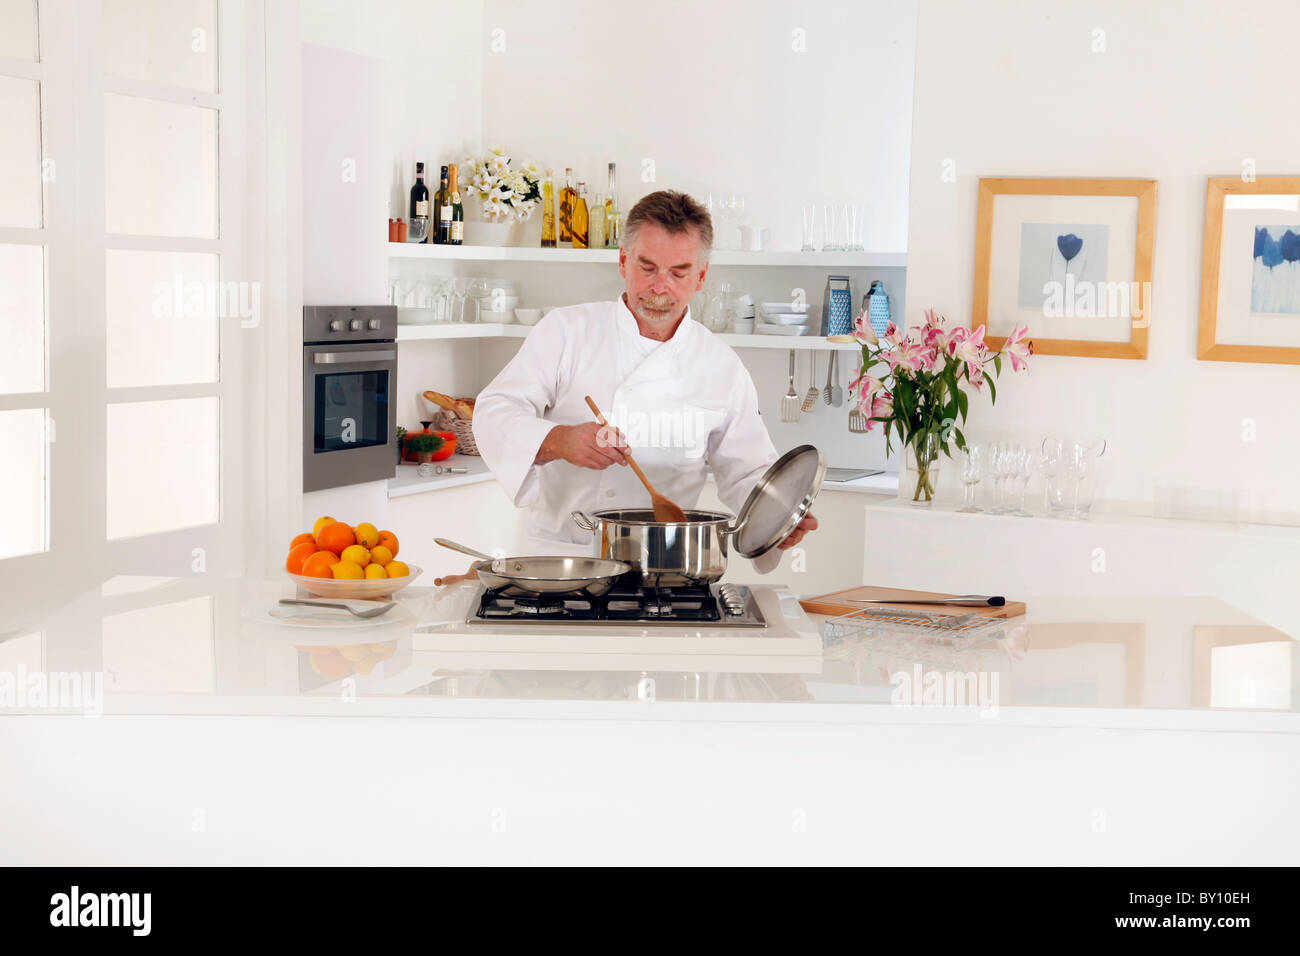 CHEF COOKING IN KITCHEN Banque D'Images